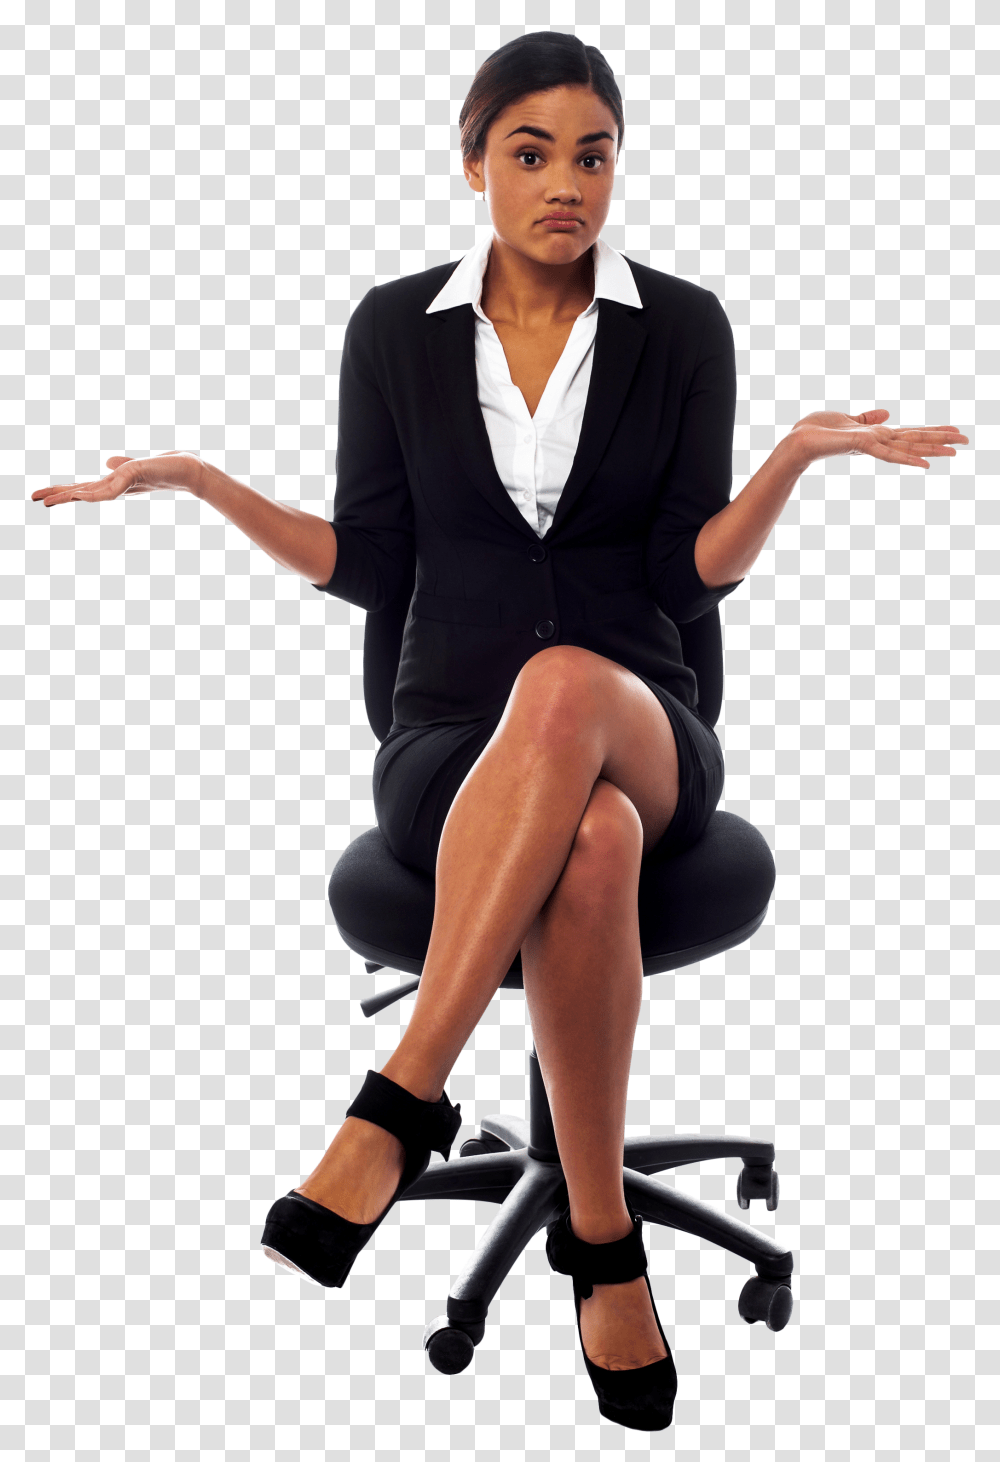 Working Women Royalty Free Image Women Sitting In Chairs, Suit, Overcoat, Shoe Transparent Png